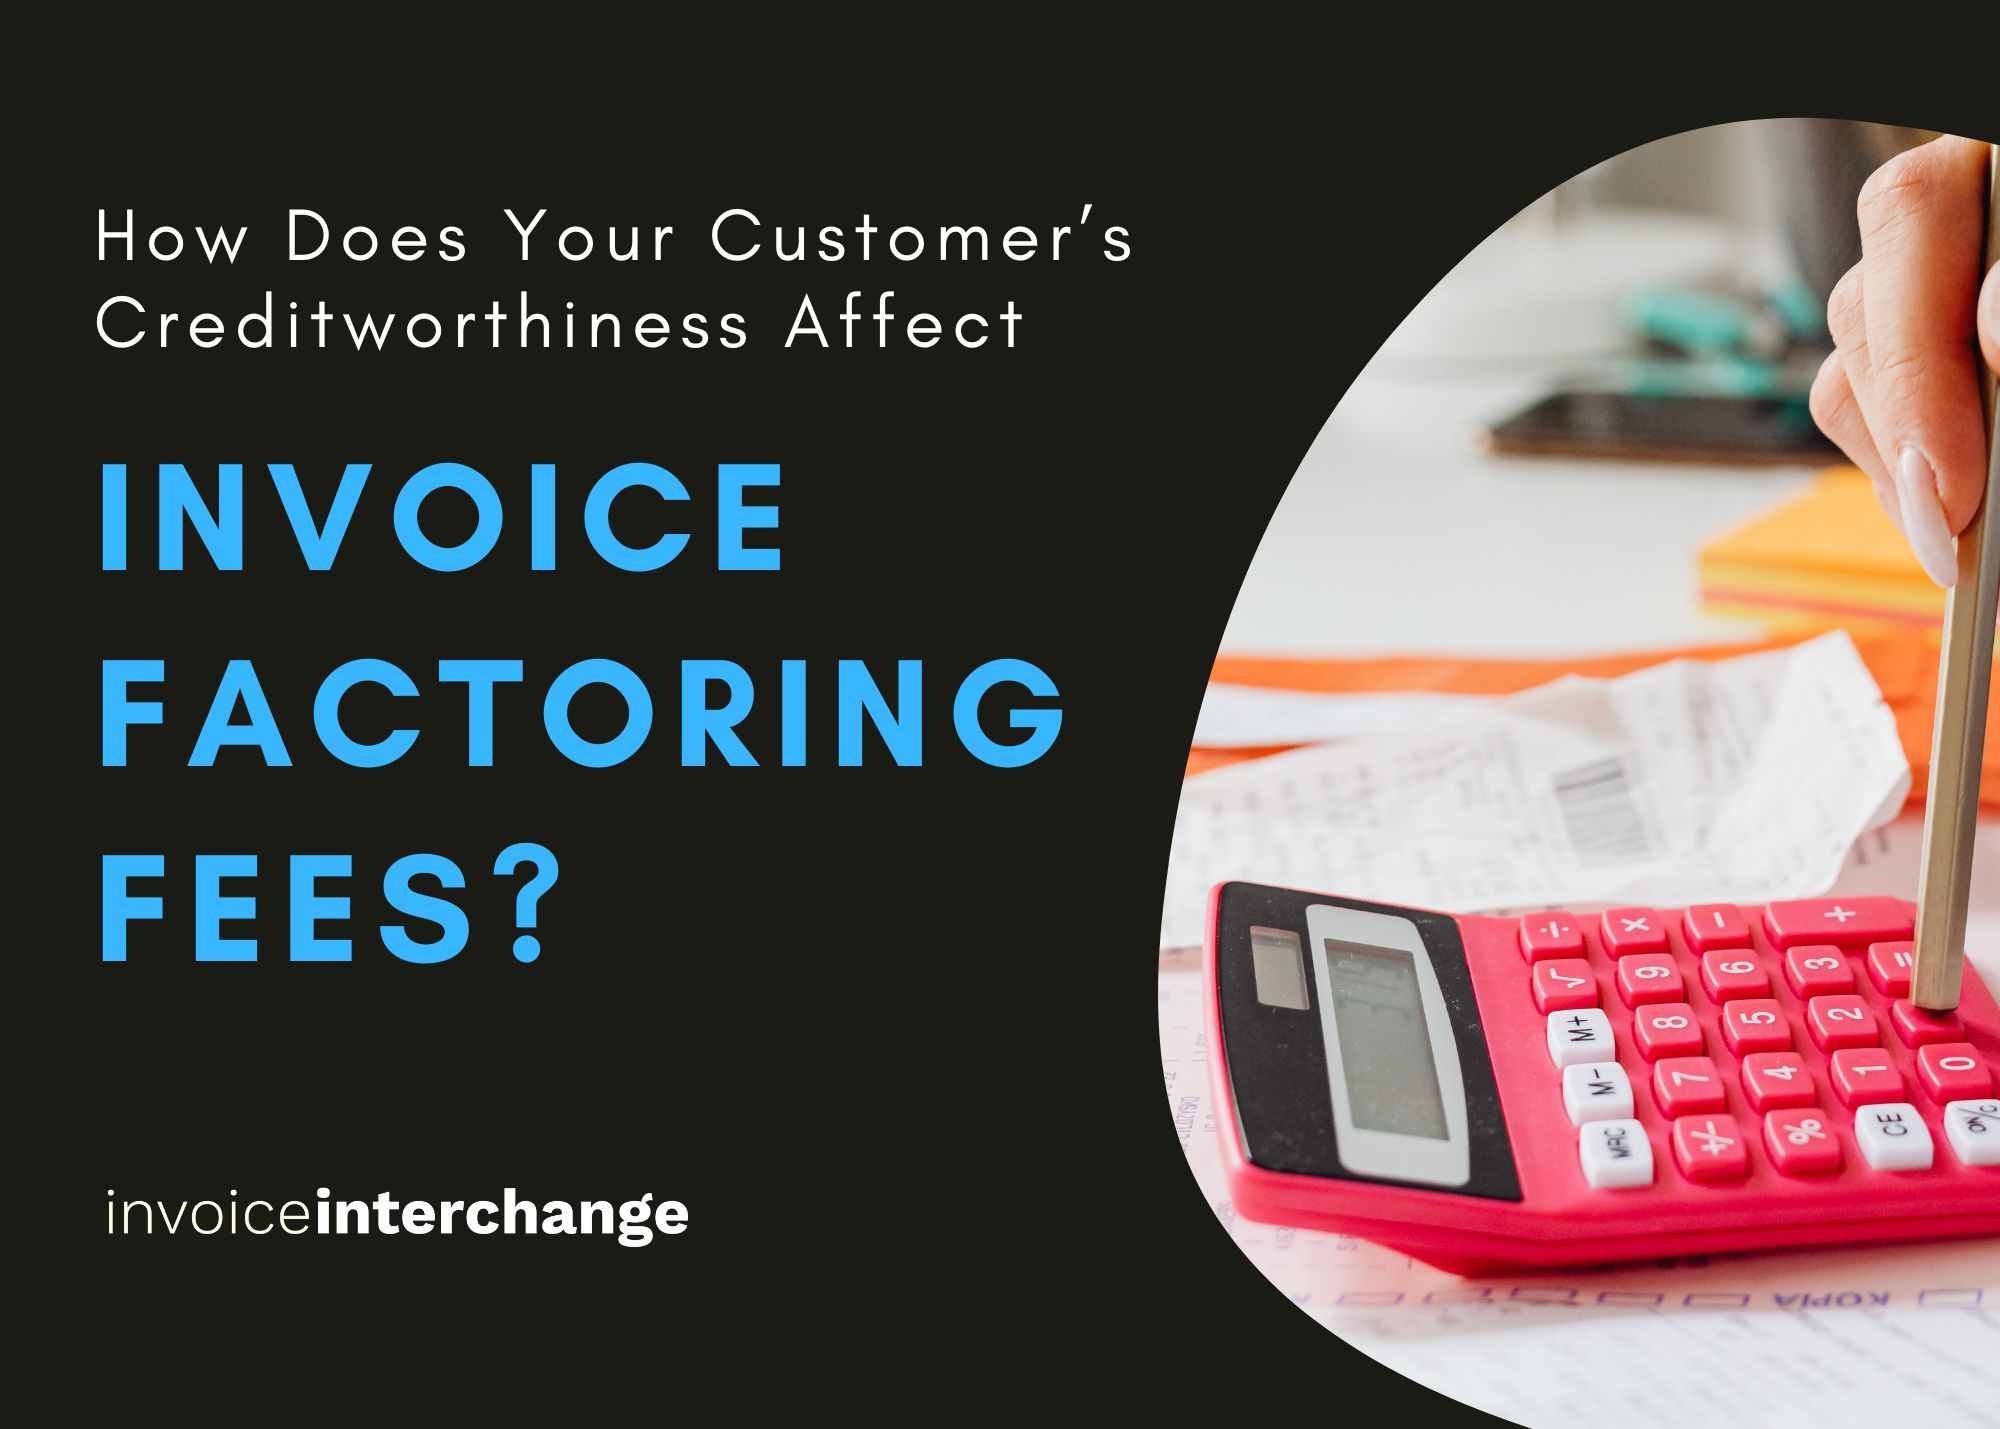 How Does Your Customer’s Creditworthiness Affect Invoice Factoring Fees?